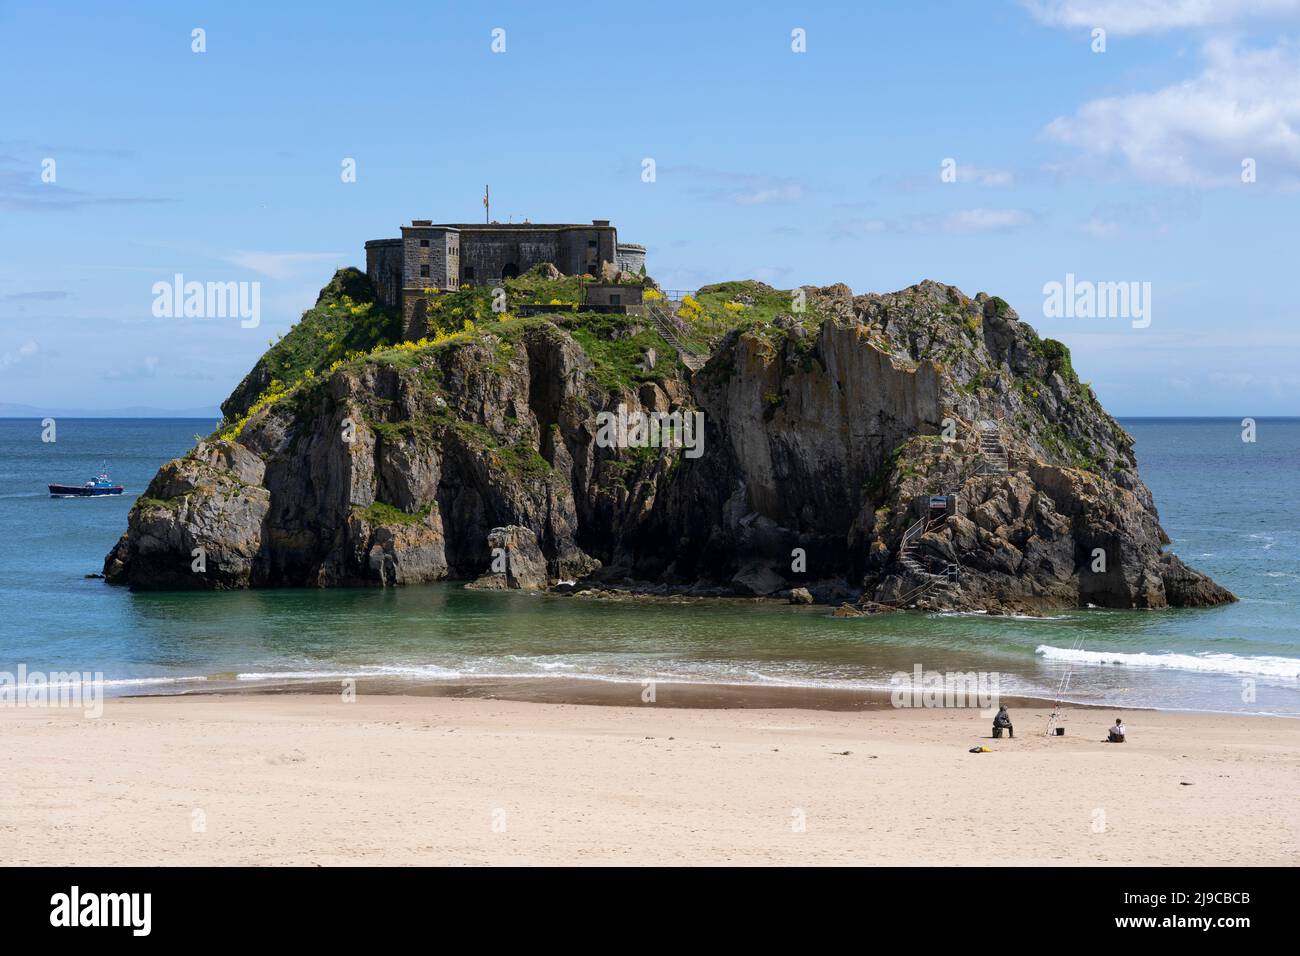 St Catherine's Island and Napoleonic Fortress on a tidal island at the foot of Castle Beach, Tenby. Carmarthen Bay, Pembrokeshire, Wales Stock Photo